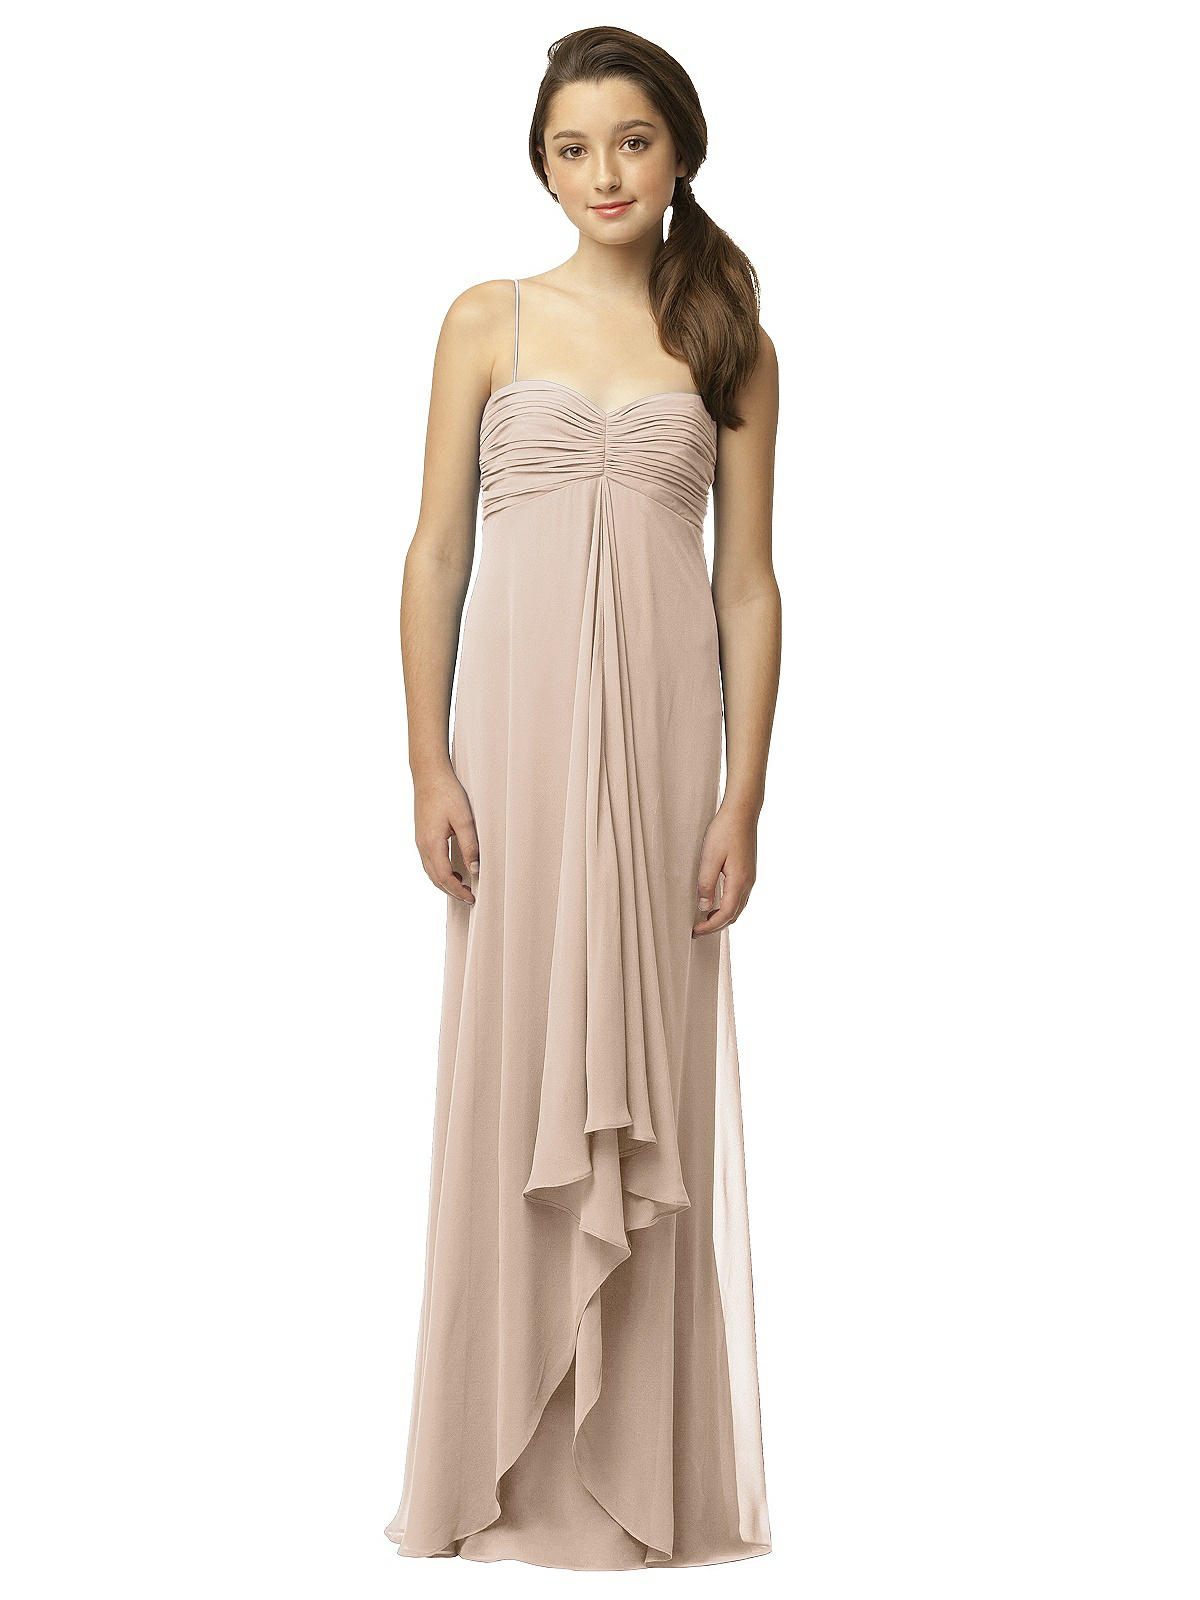 Junior Bridesmaid Style JR518 | The Dessy Group